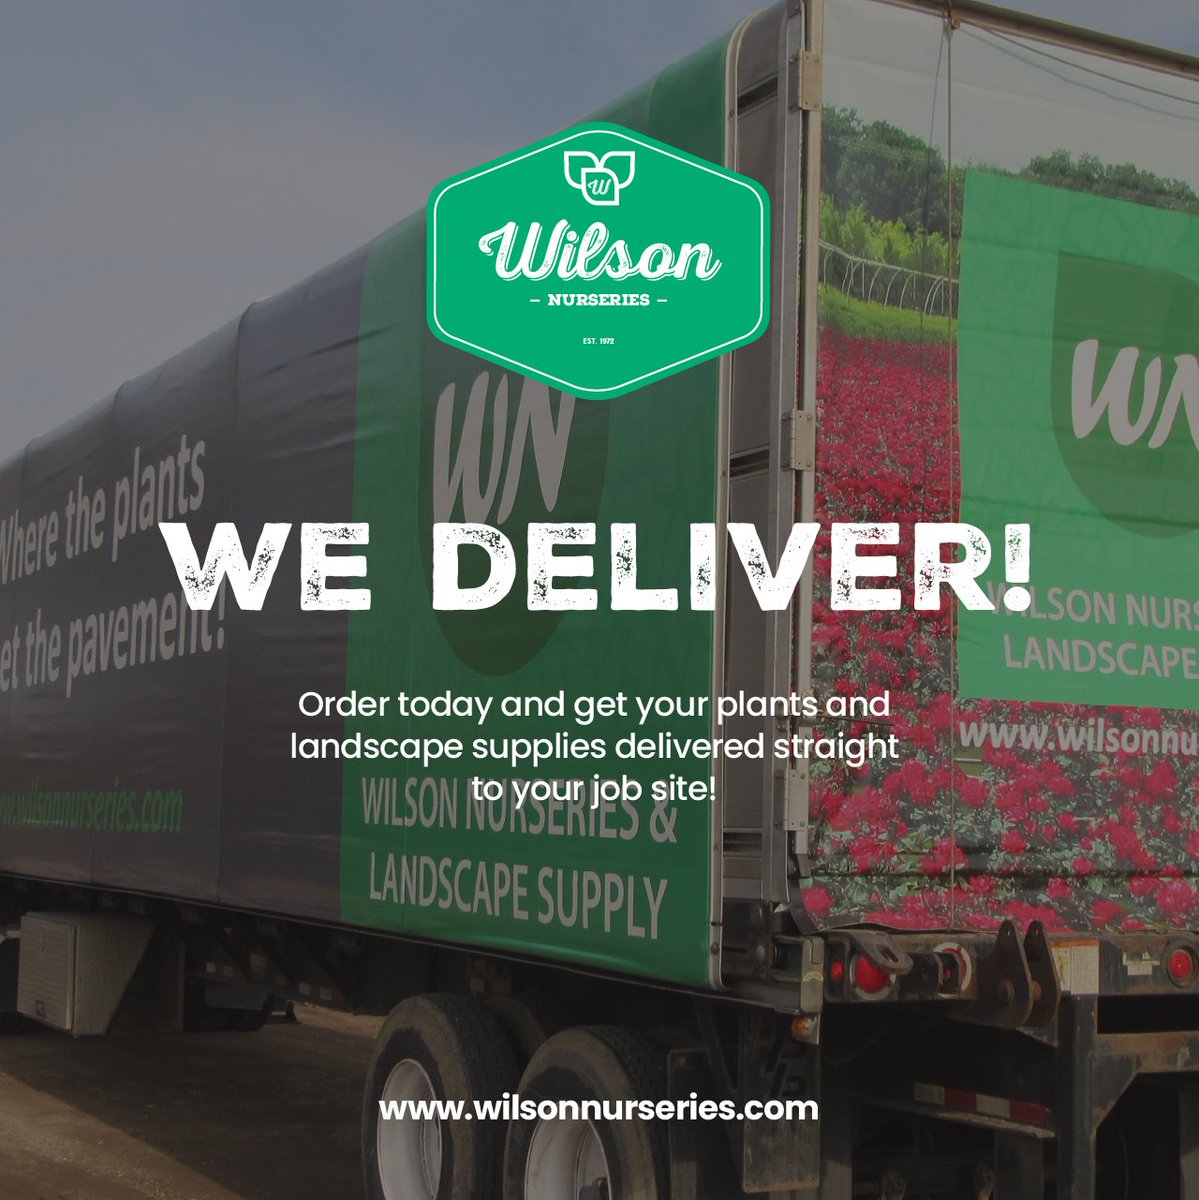 Our deliveries are able to be shipped all over the greater Chicago area! Shipping straight to your job site makes planting easier than ever. Order today!
-
-
-
 #plantnursery #plants #gardening #wilsonnurseries #chicago #illinois